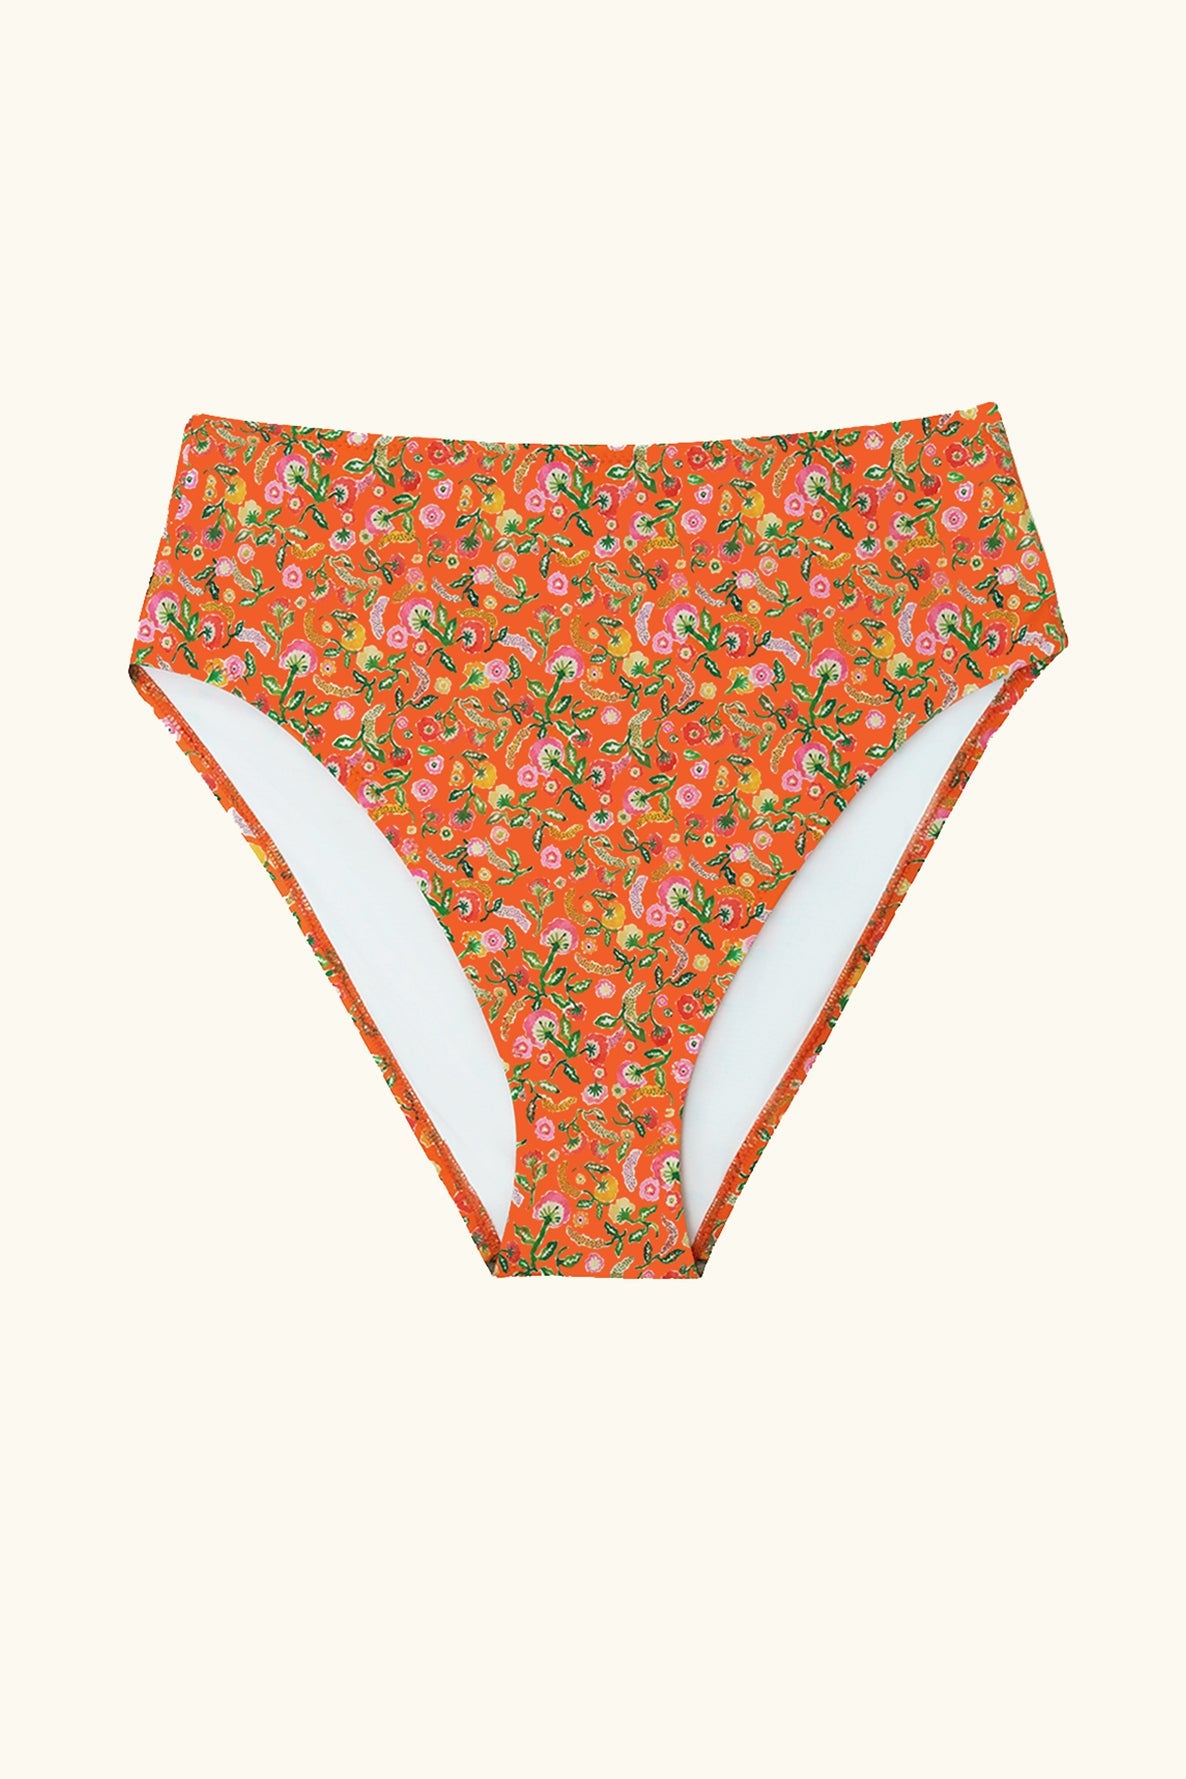 high waisted bikini bottom orange floral print swimsuit made from recycled materials